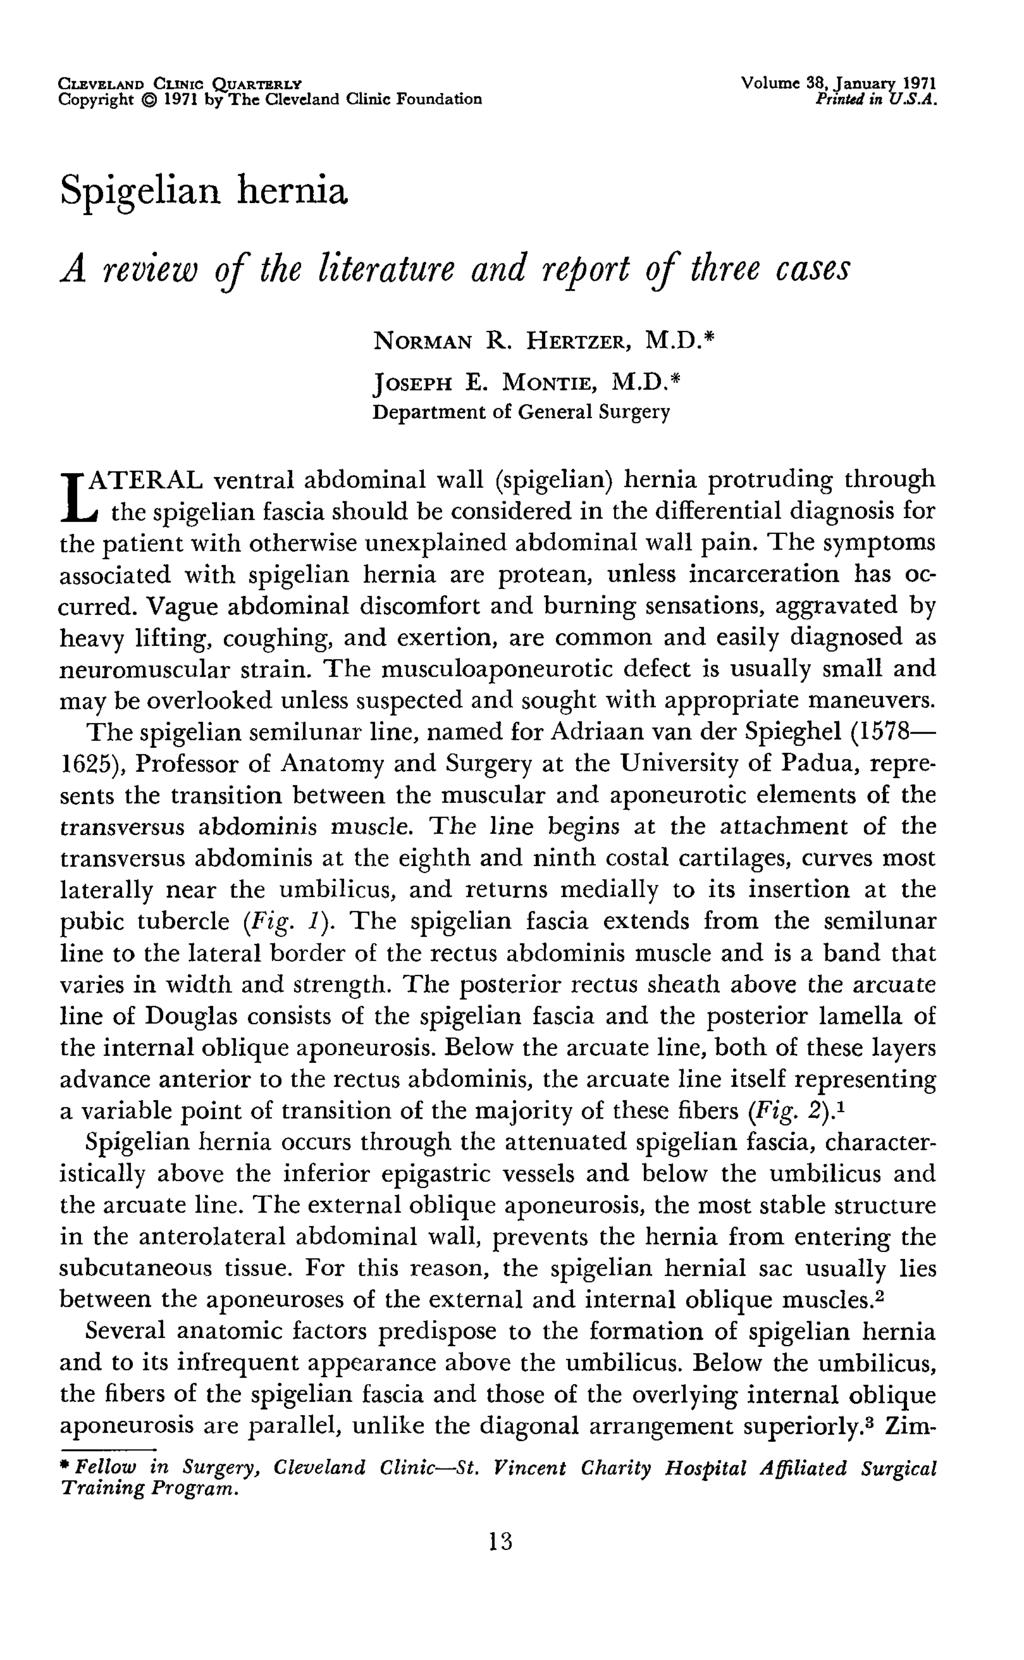 CLEVELAND CLINIC QUARTERLY Copyright 1971 by The Cleveland Clinic Foundation Volume 38, January 1971 Printed in U.S.A. Spigelian hernia A review of the literature and report of three cases NORMAN R.